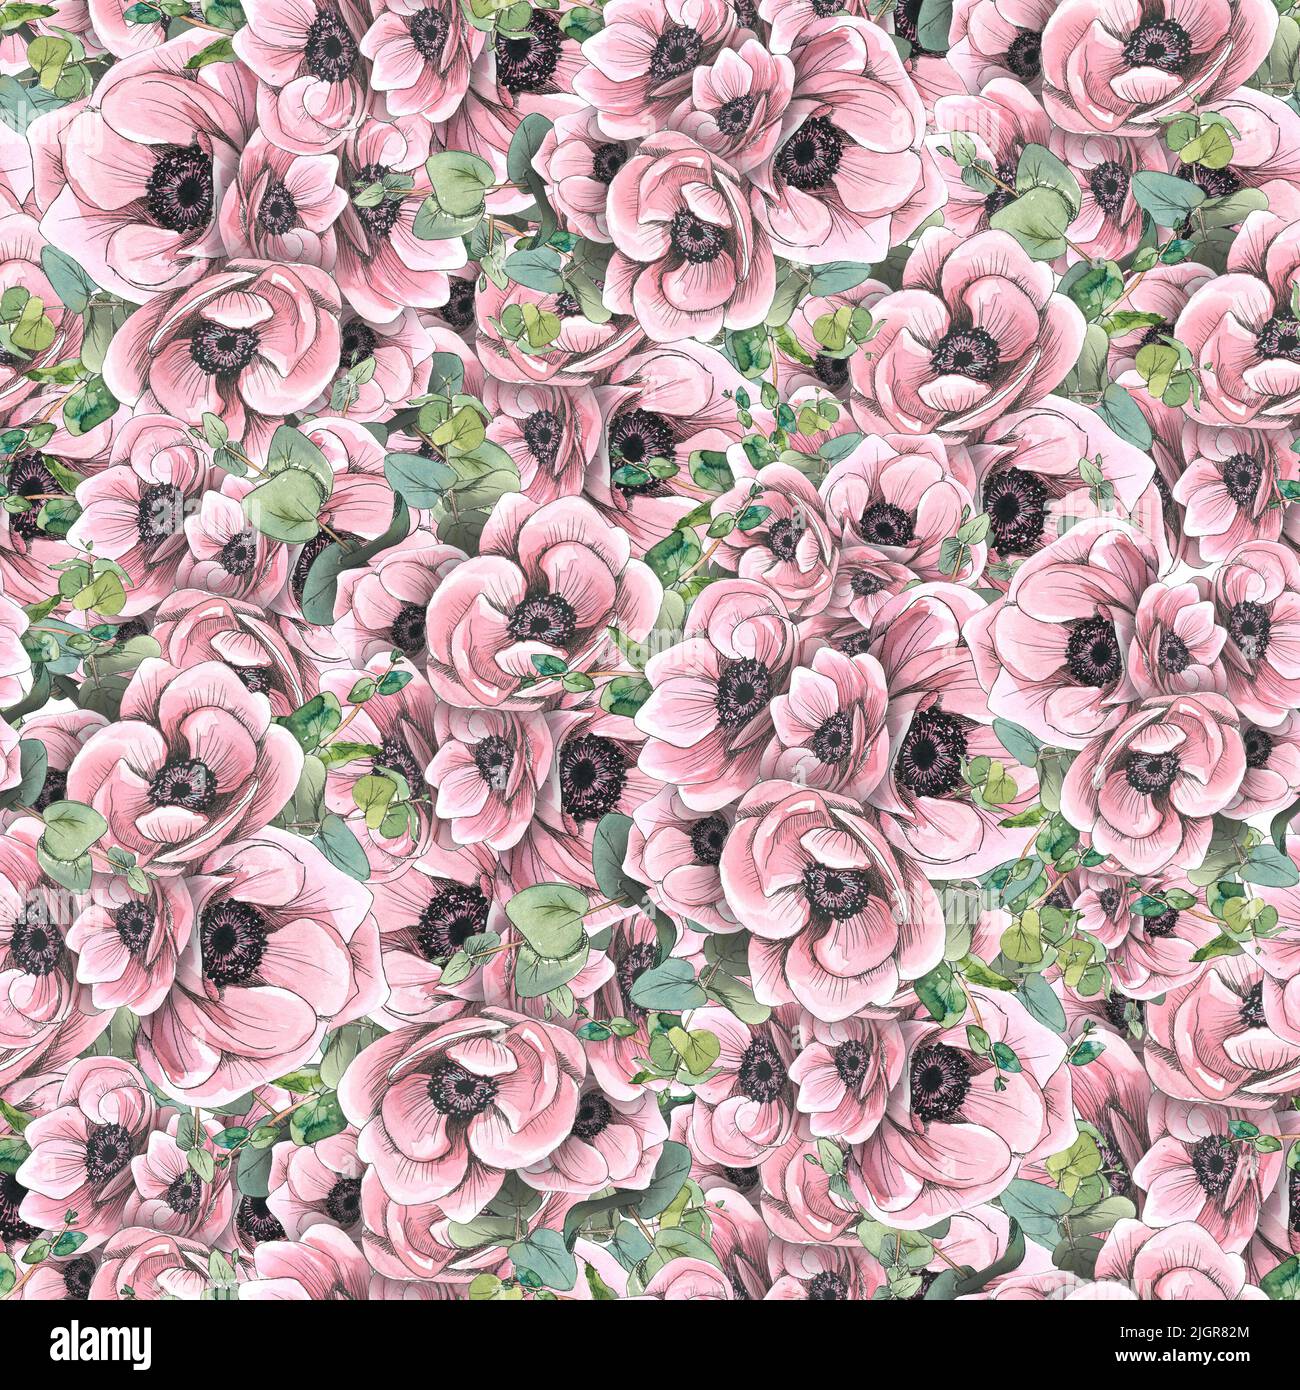 Pink anemones with eucalyptus twigs. Watercolor illustration in sketch style with graphic elements. Seamless pattern from a large set of PARIS. For Stock Photo